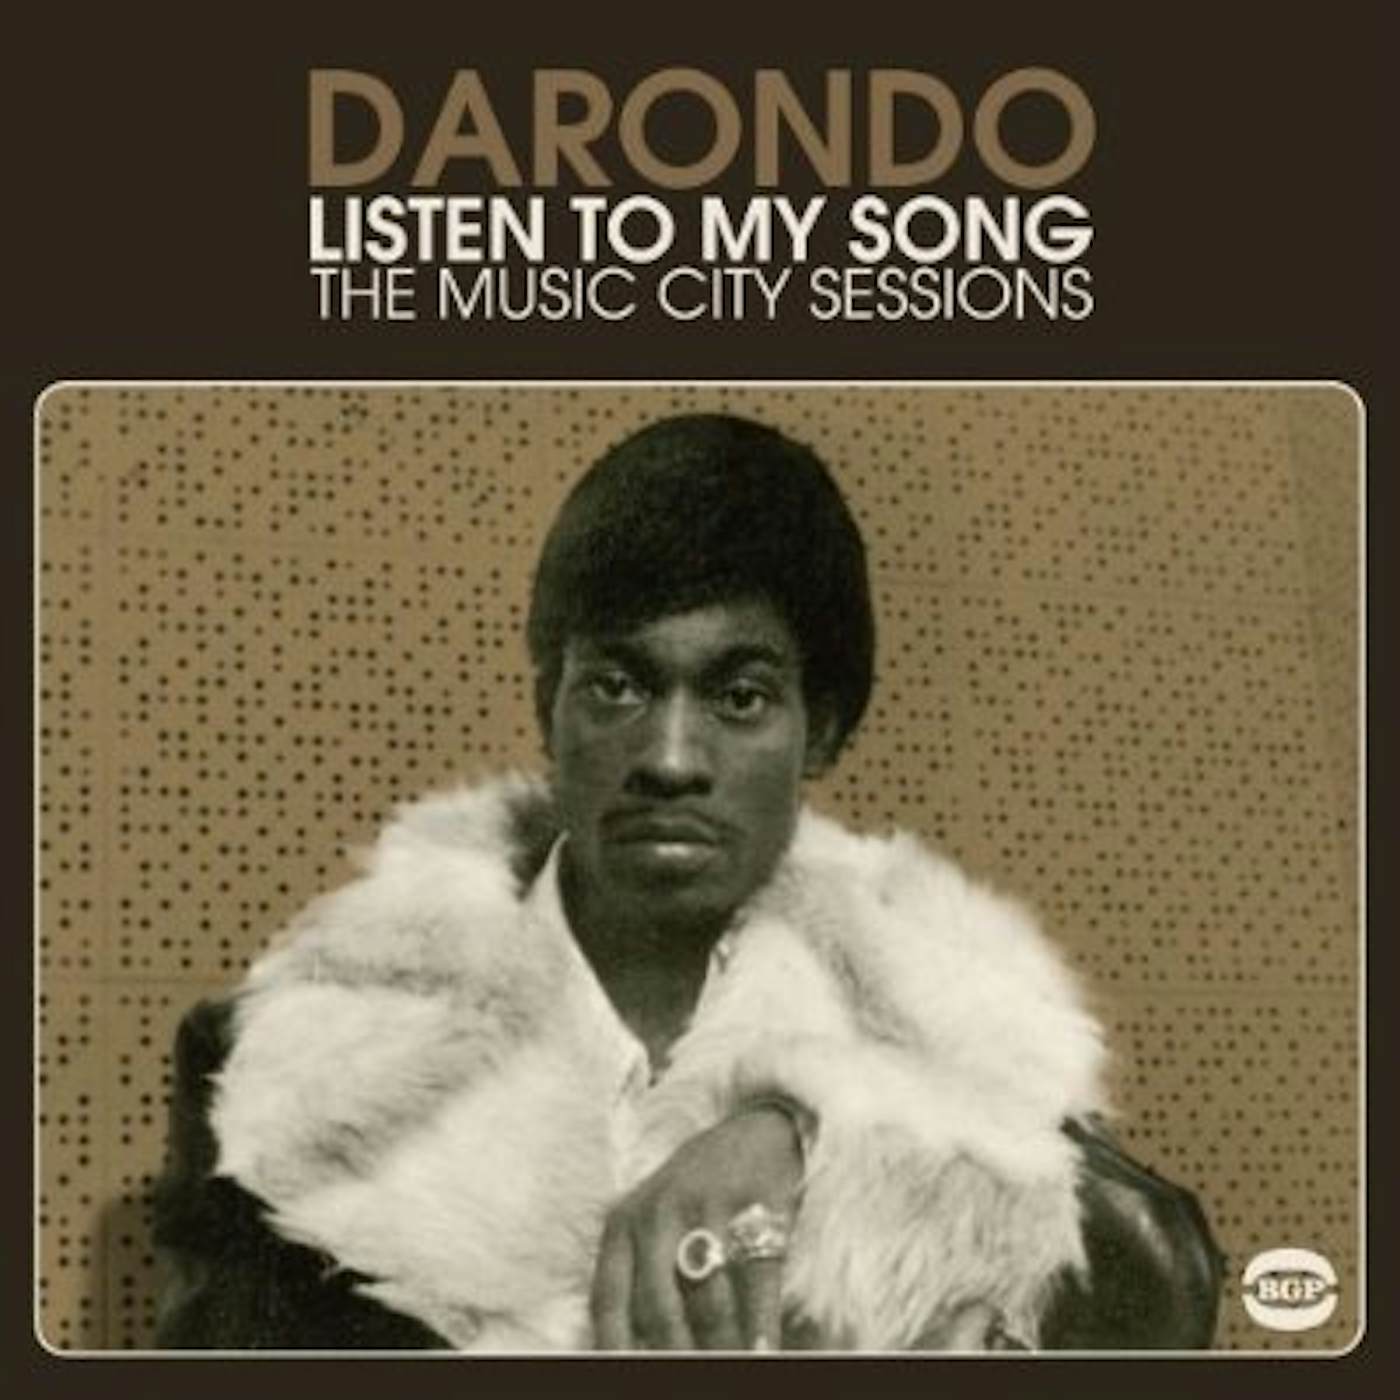 Darondo LISTEN TO MY SONG: MUSIC CITY SESSIONS CD